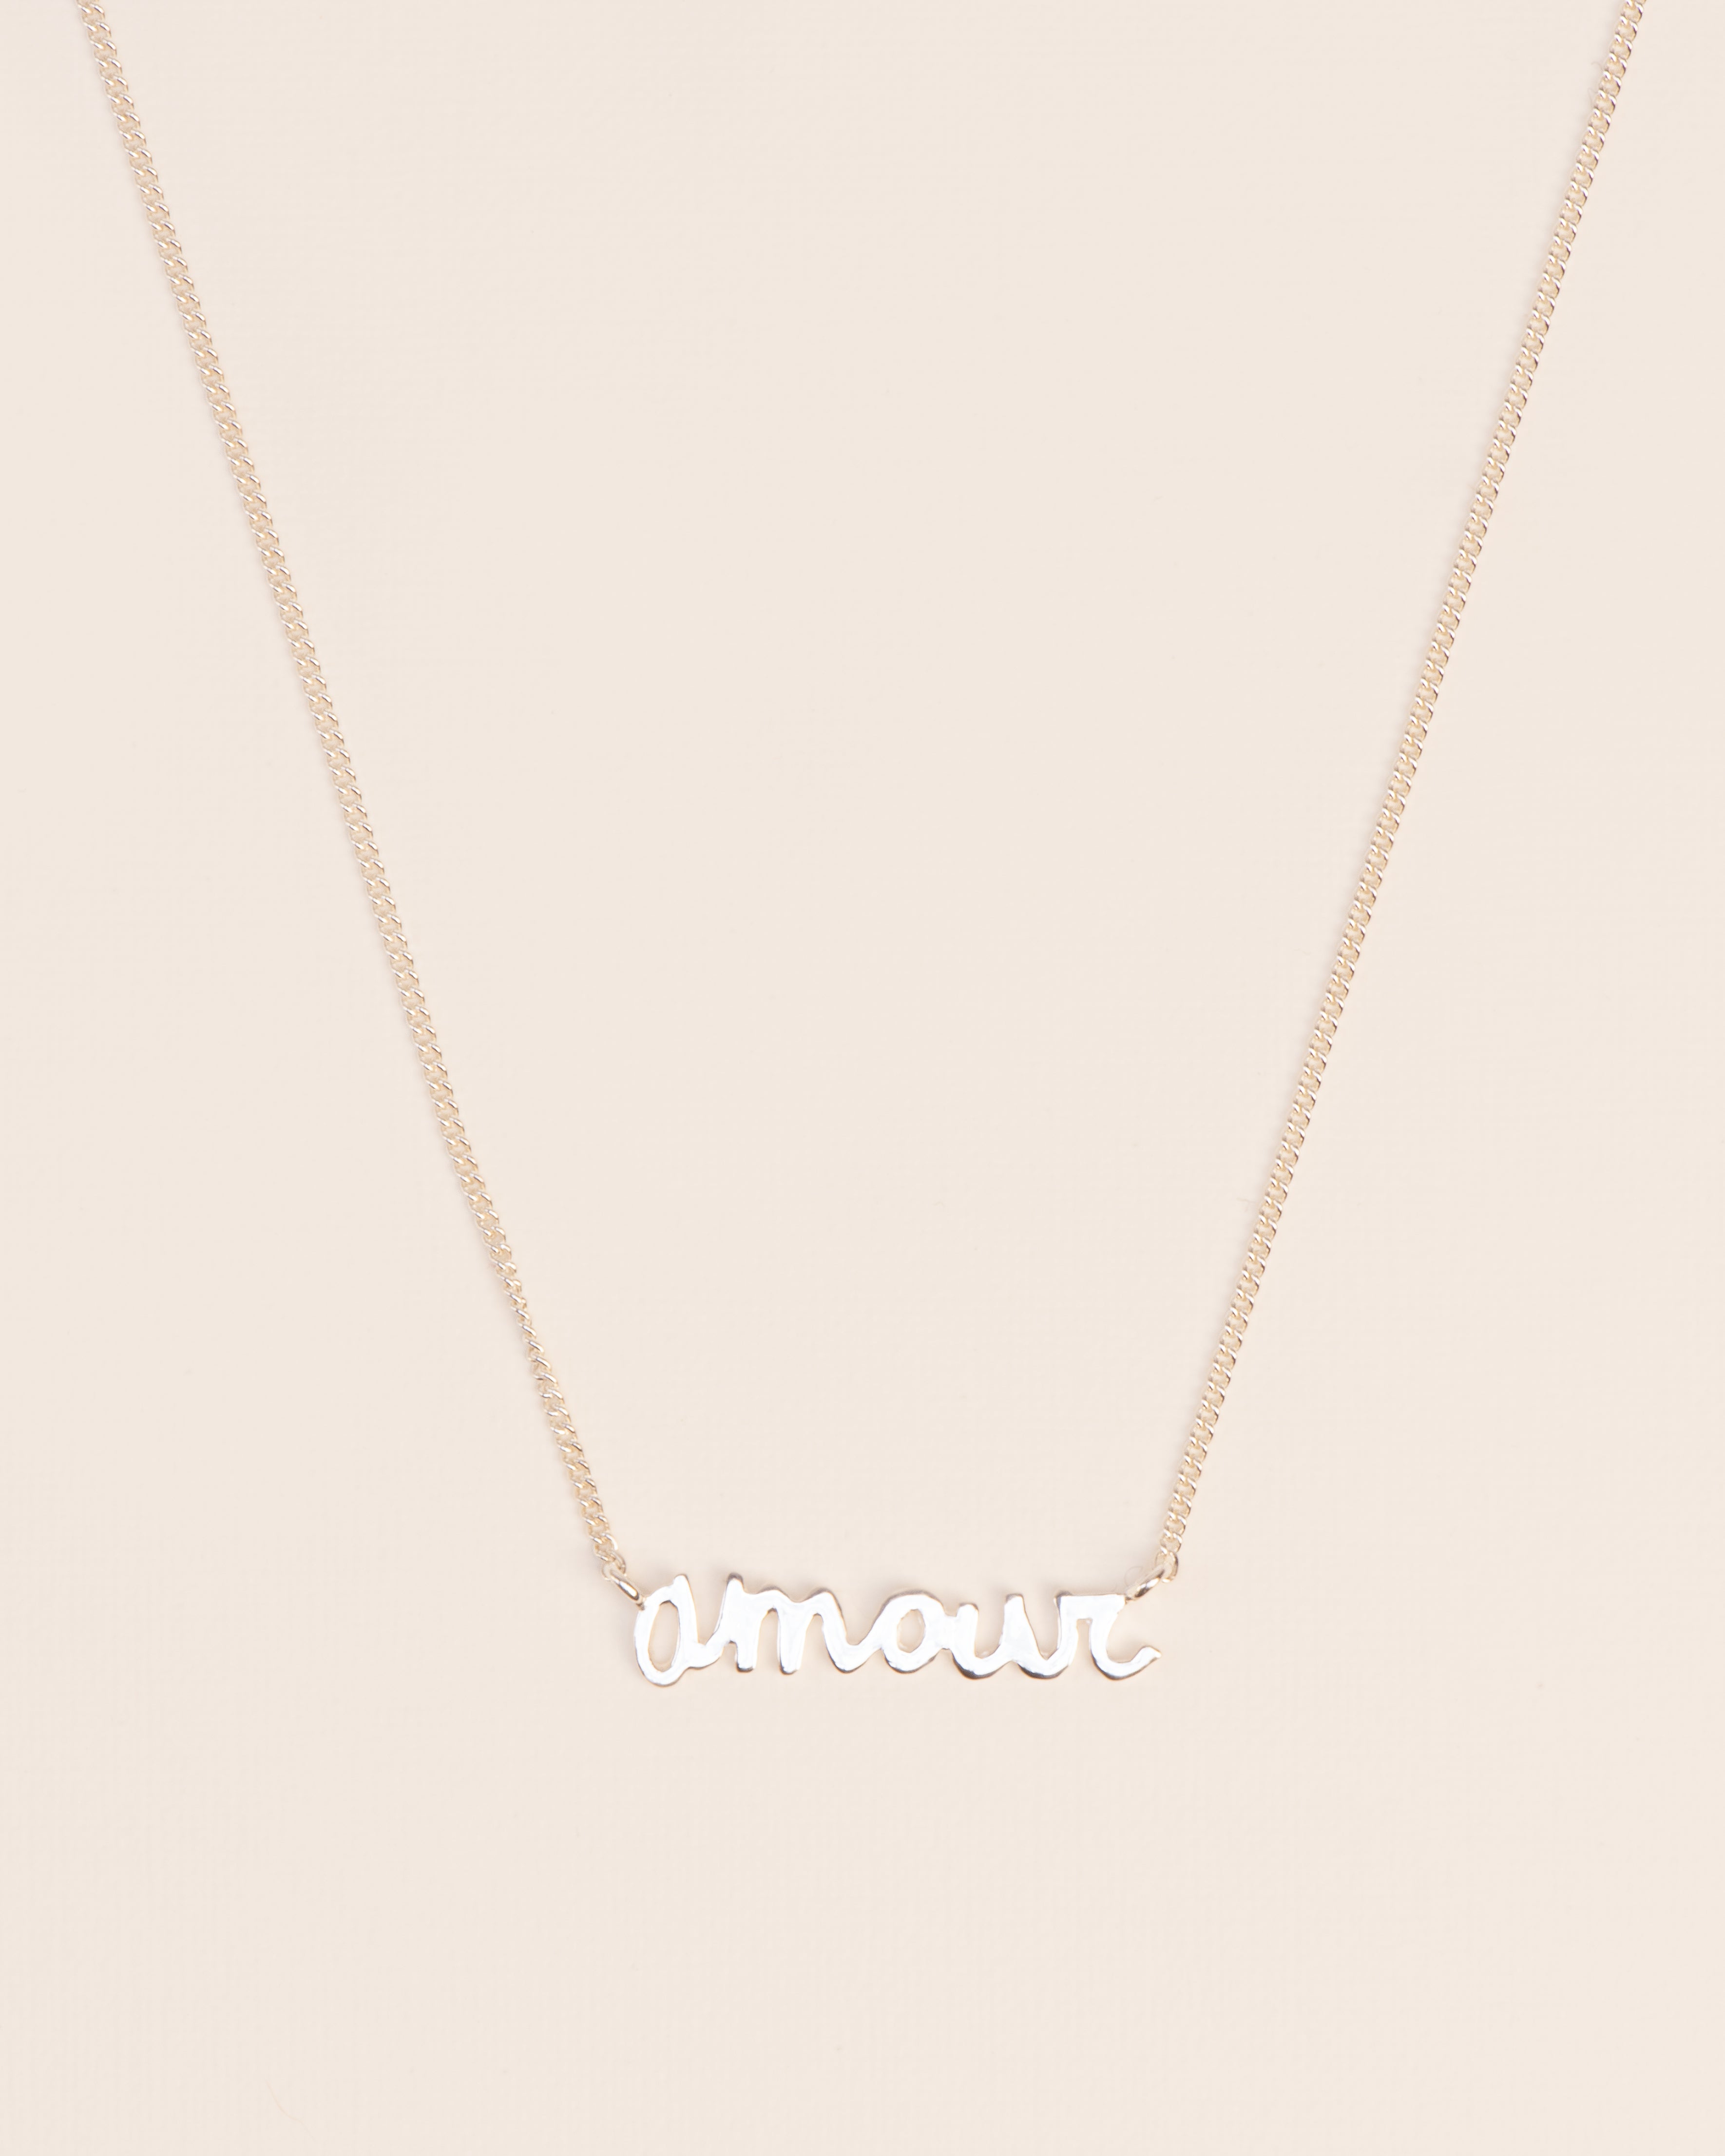 Amour necklace in silver